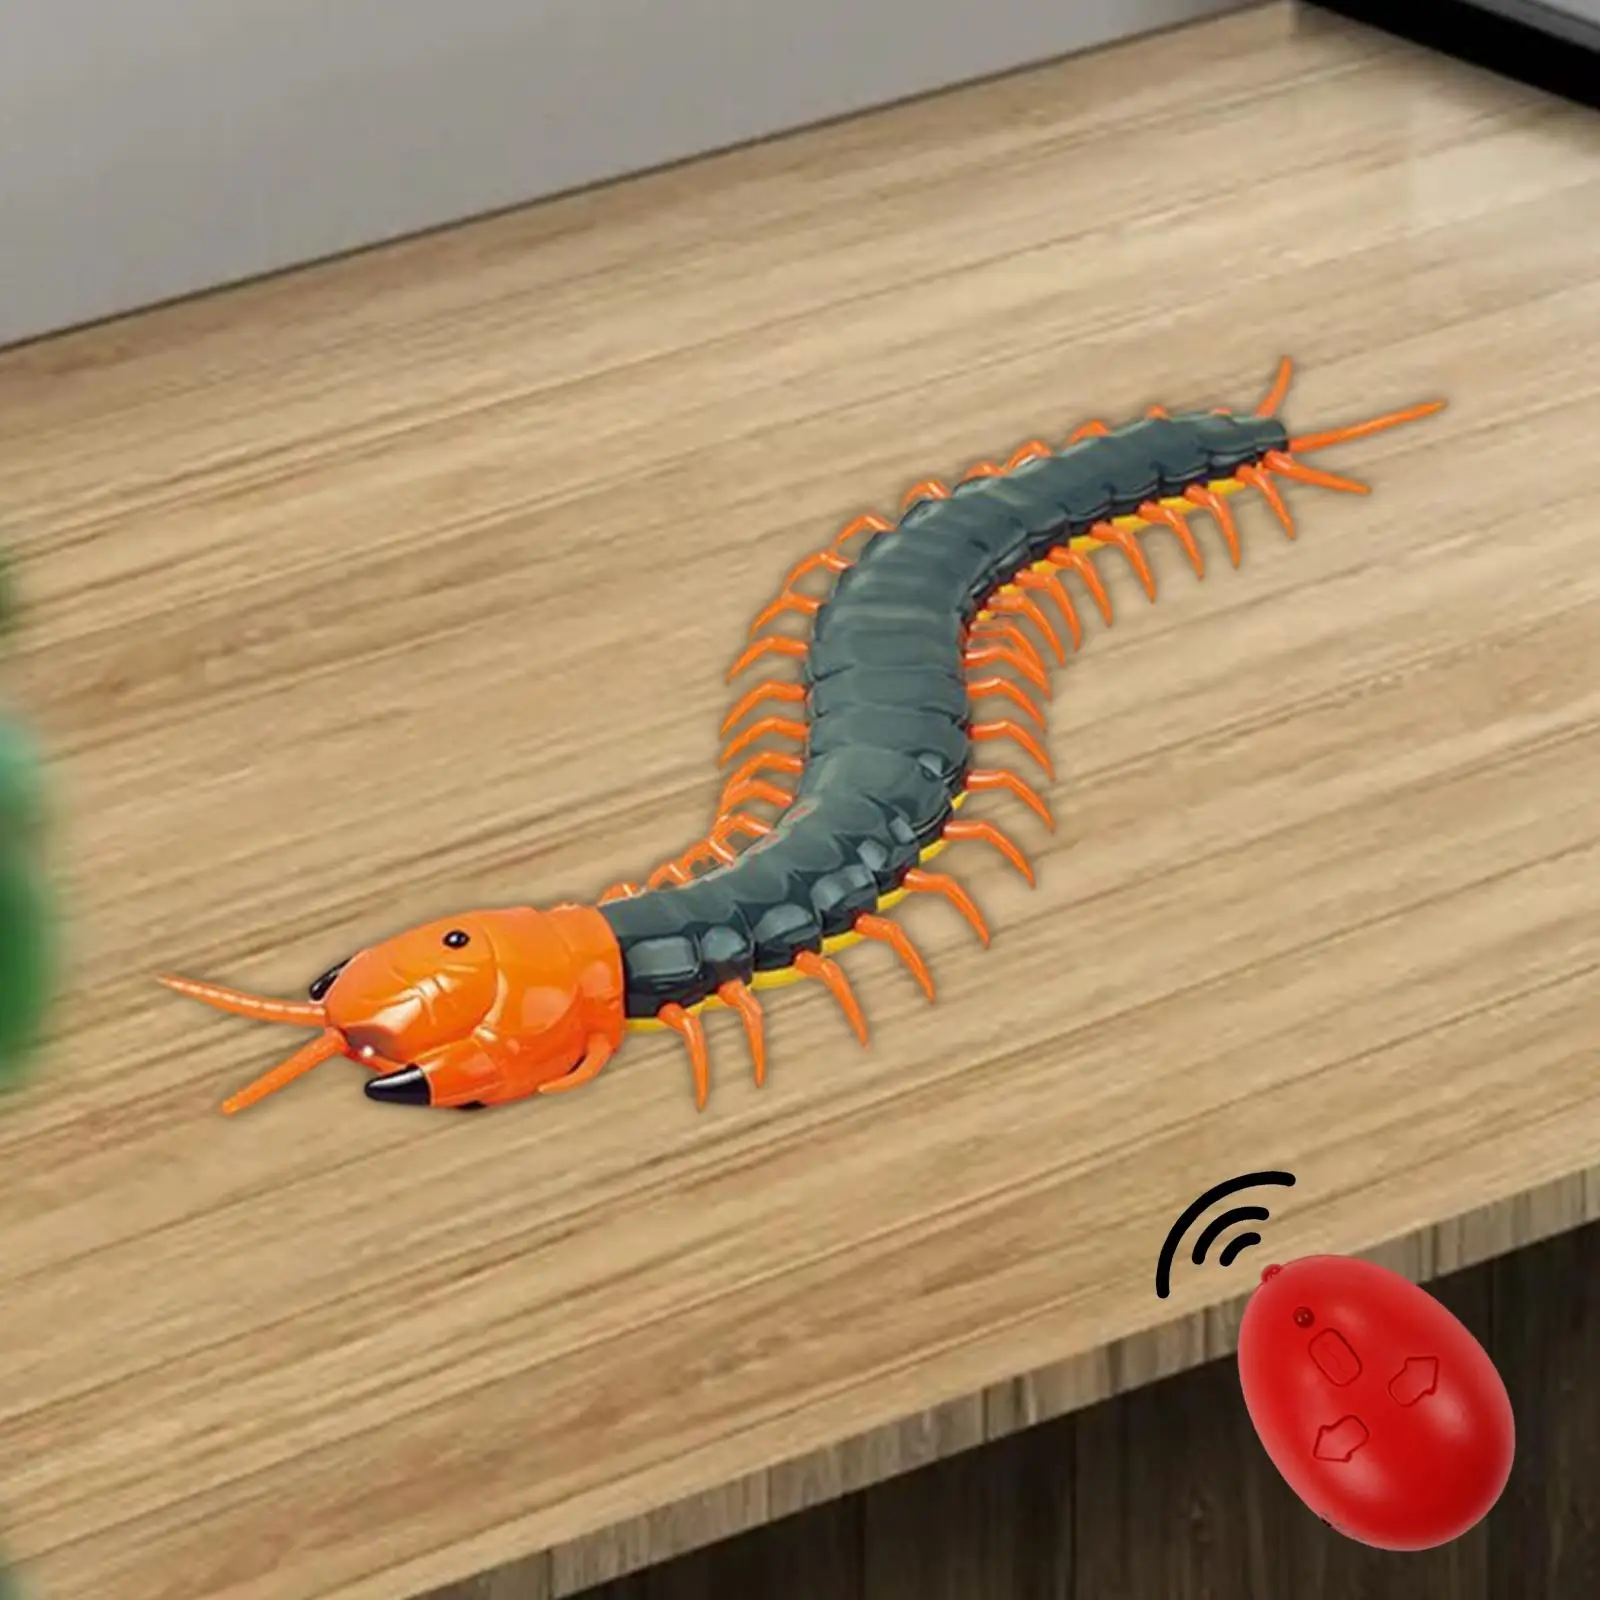 Electric Centipede Toy Tricky Props Centipede Toys Electric Toys ChildrenS Remote Control Centipede for Dogs